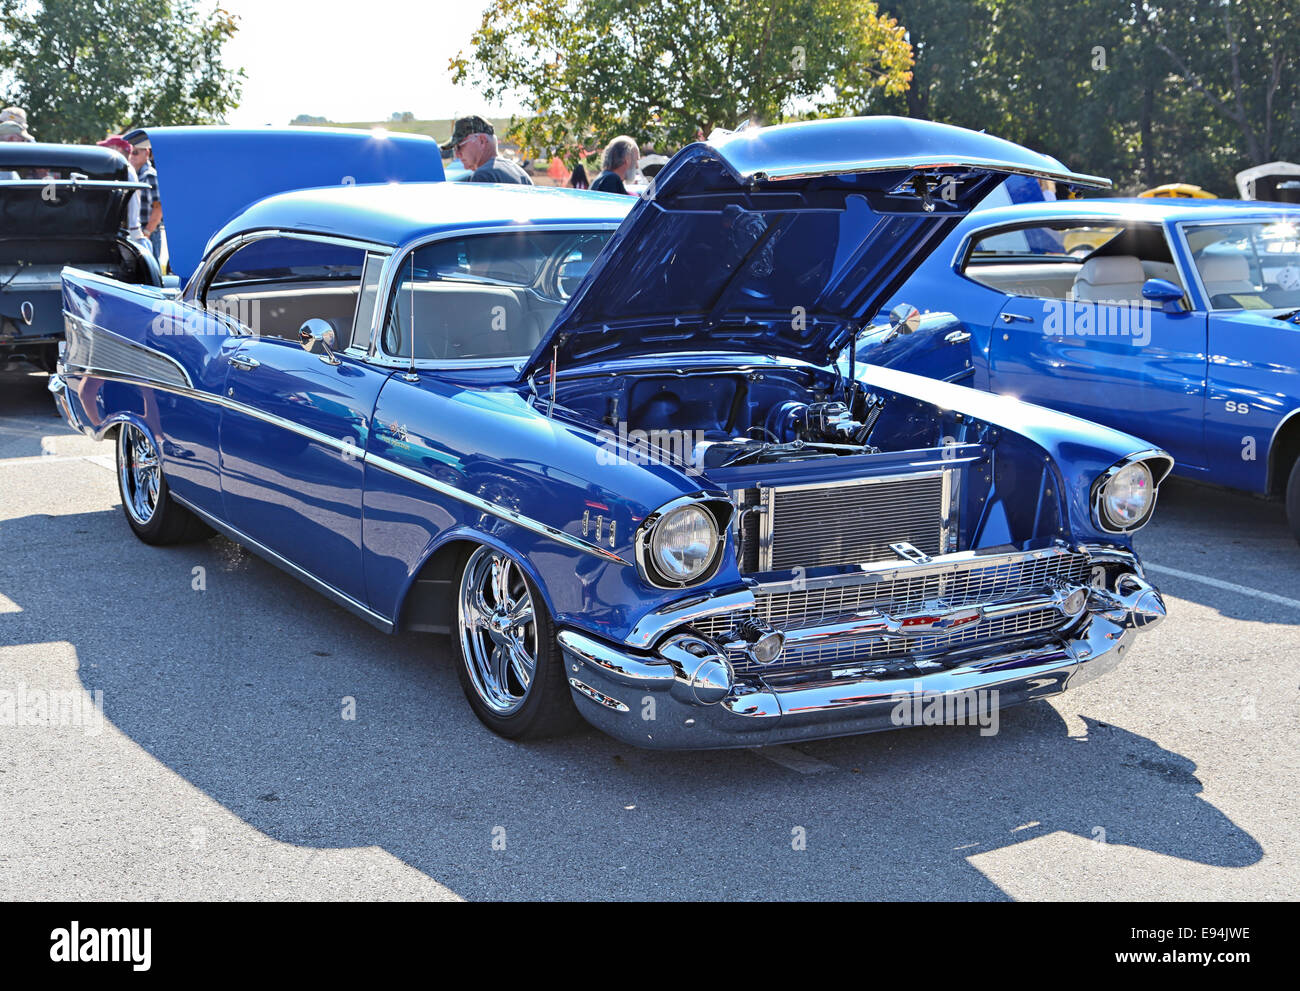 57 Chevy Bel Air Stock Photo